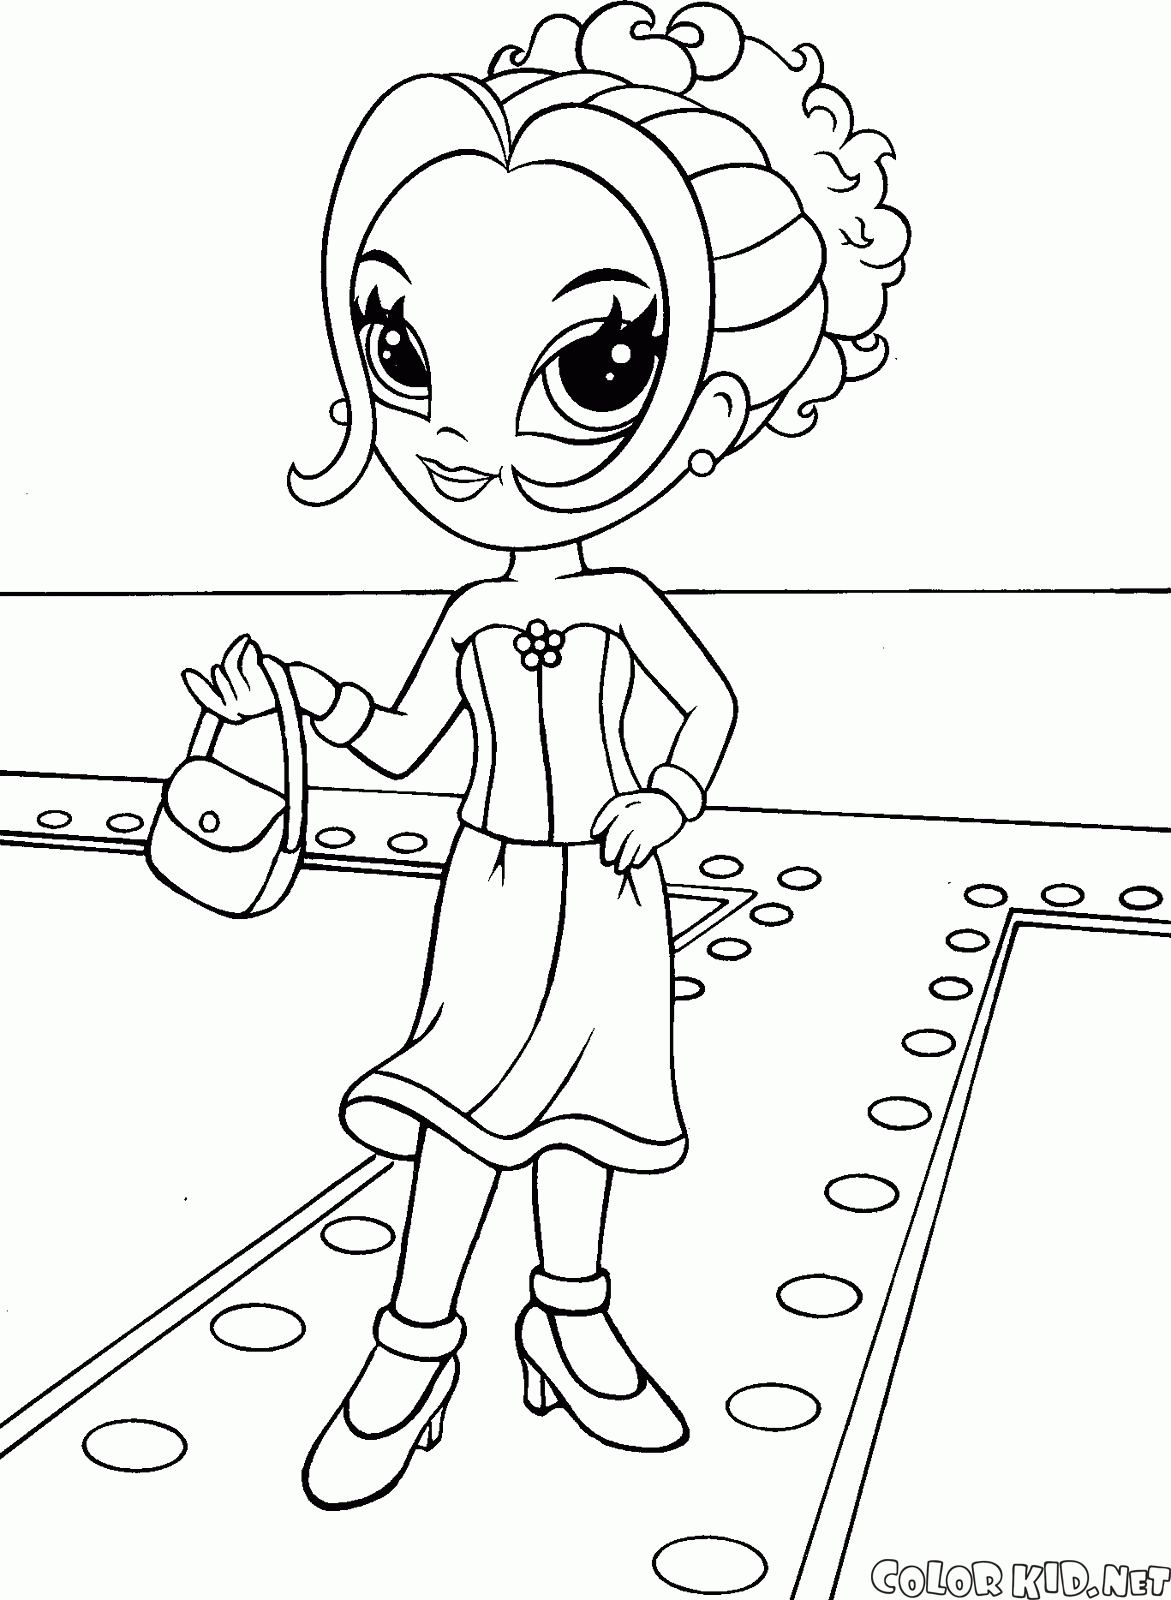 Coloring page - Lisa Frank Glamour Girl